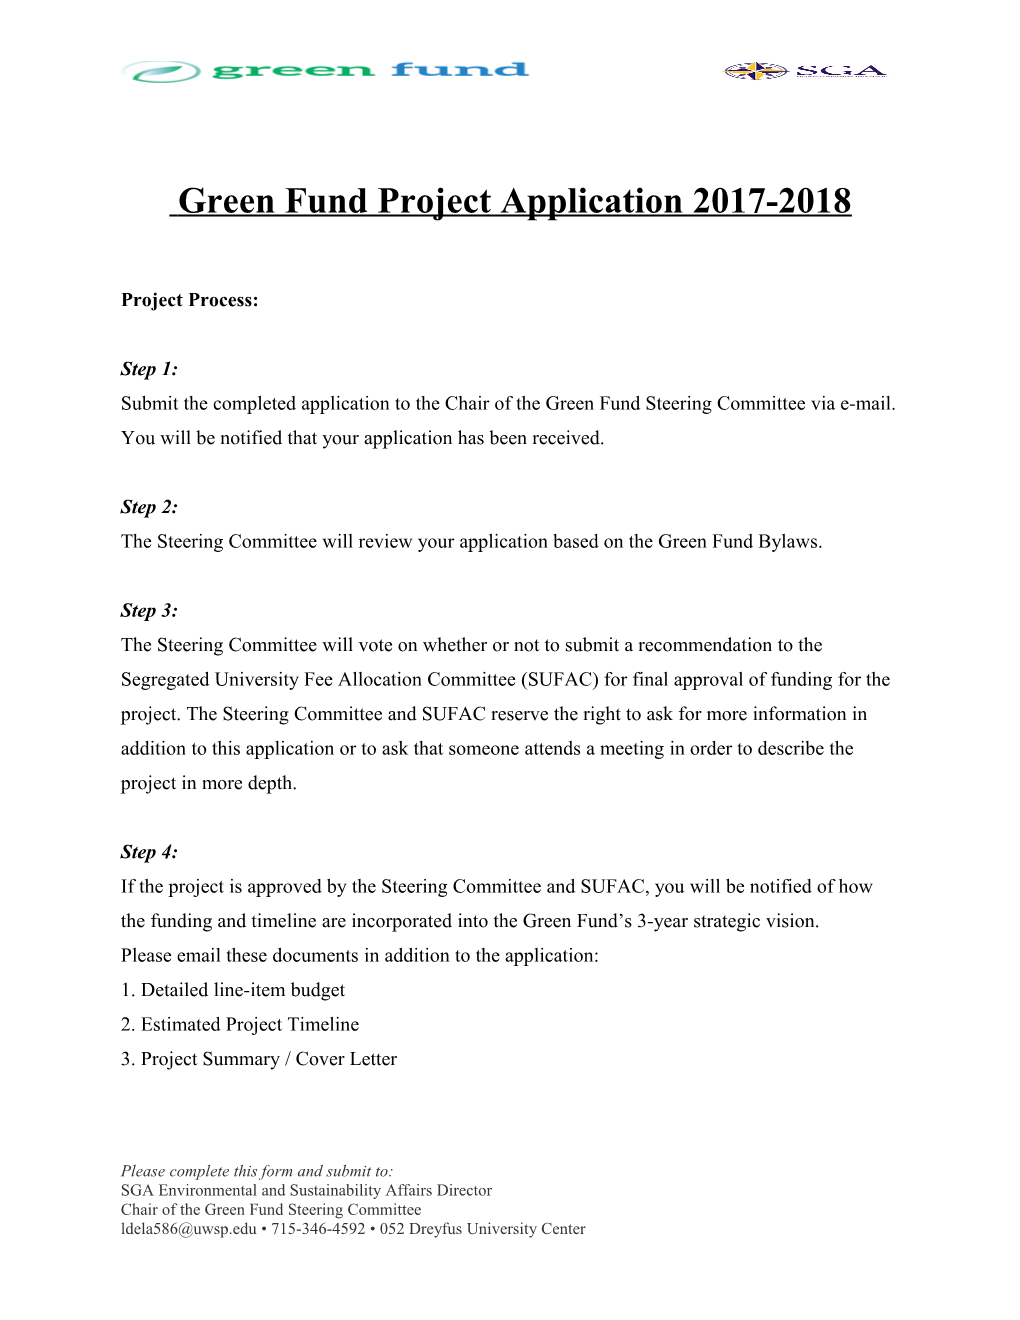 Green Fund Project Application 2017-2018